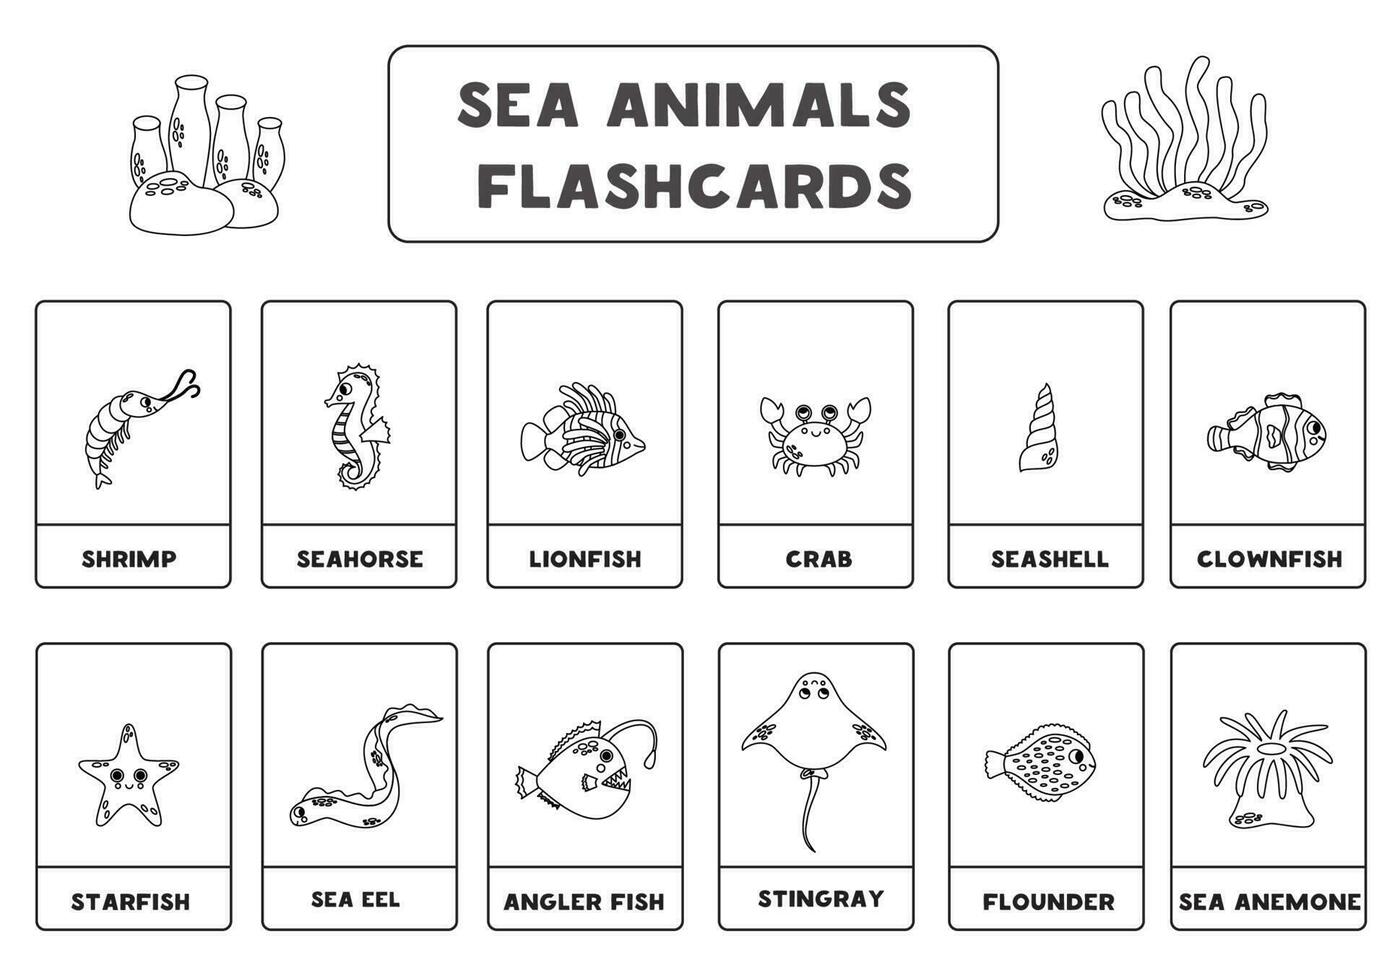 Cute cartoon sea animals with names. Black and white. Flashcards for learning English. vector